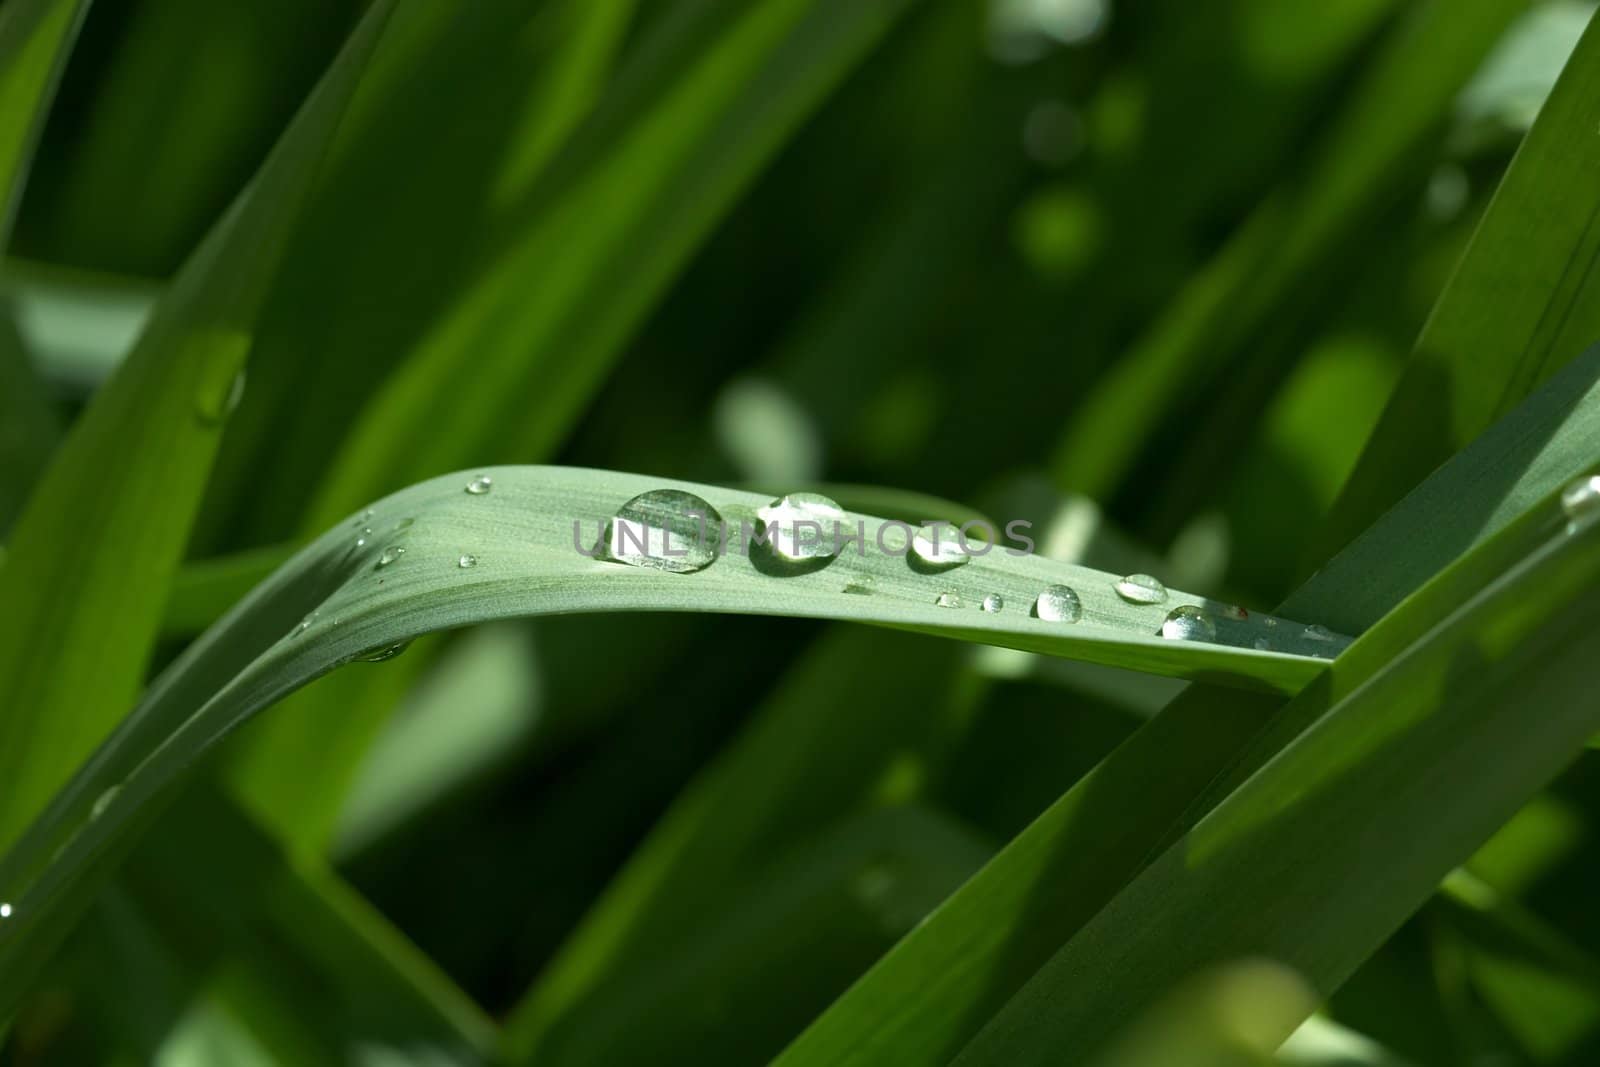 Dew on Grass by LoonChild